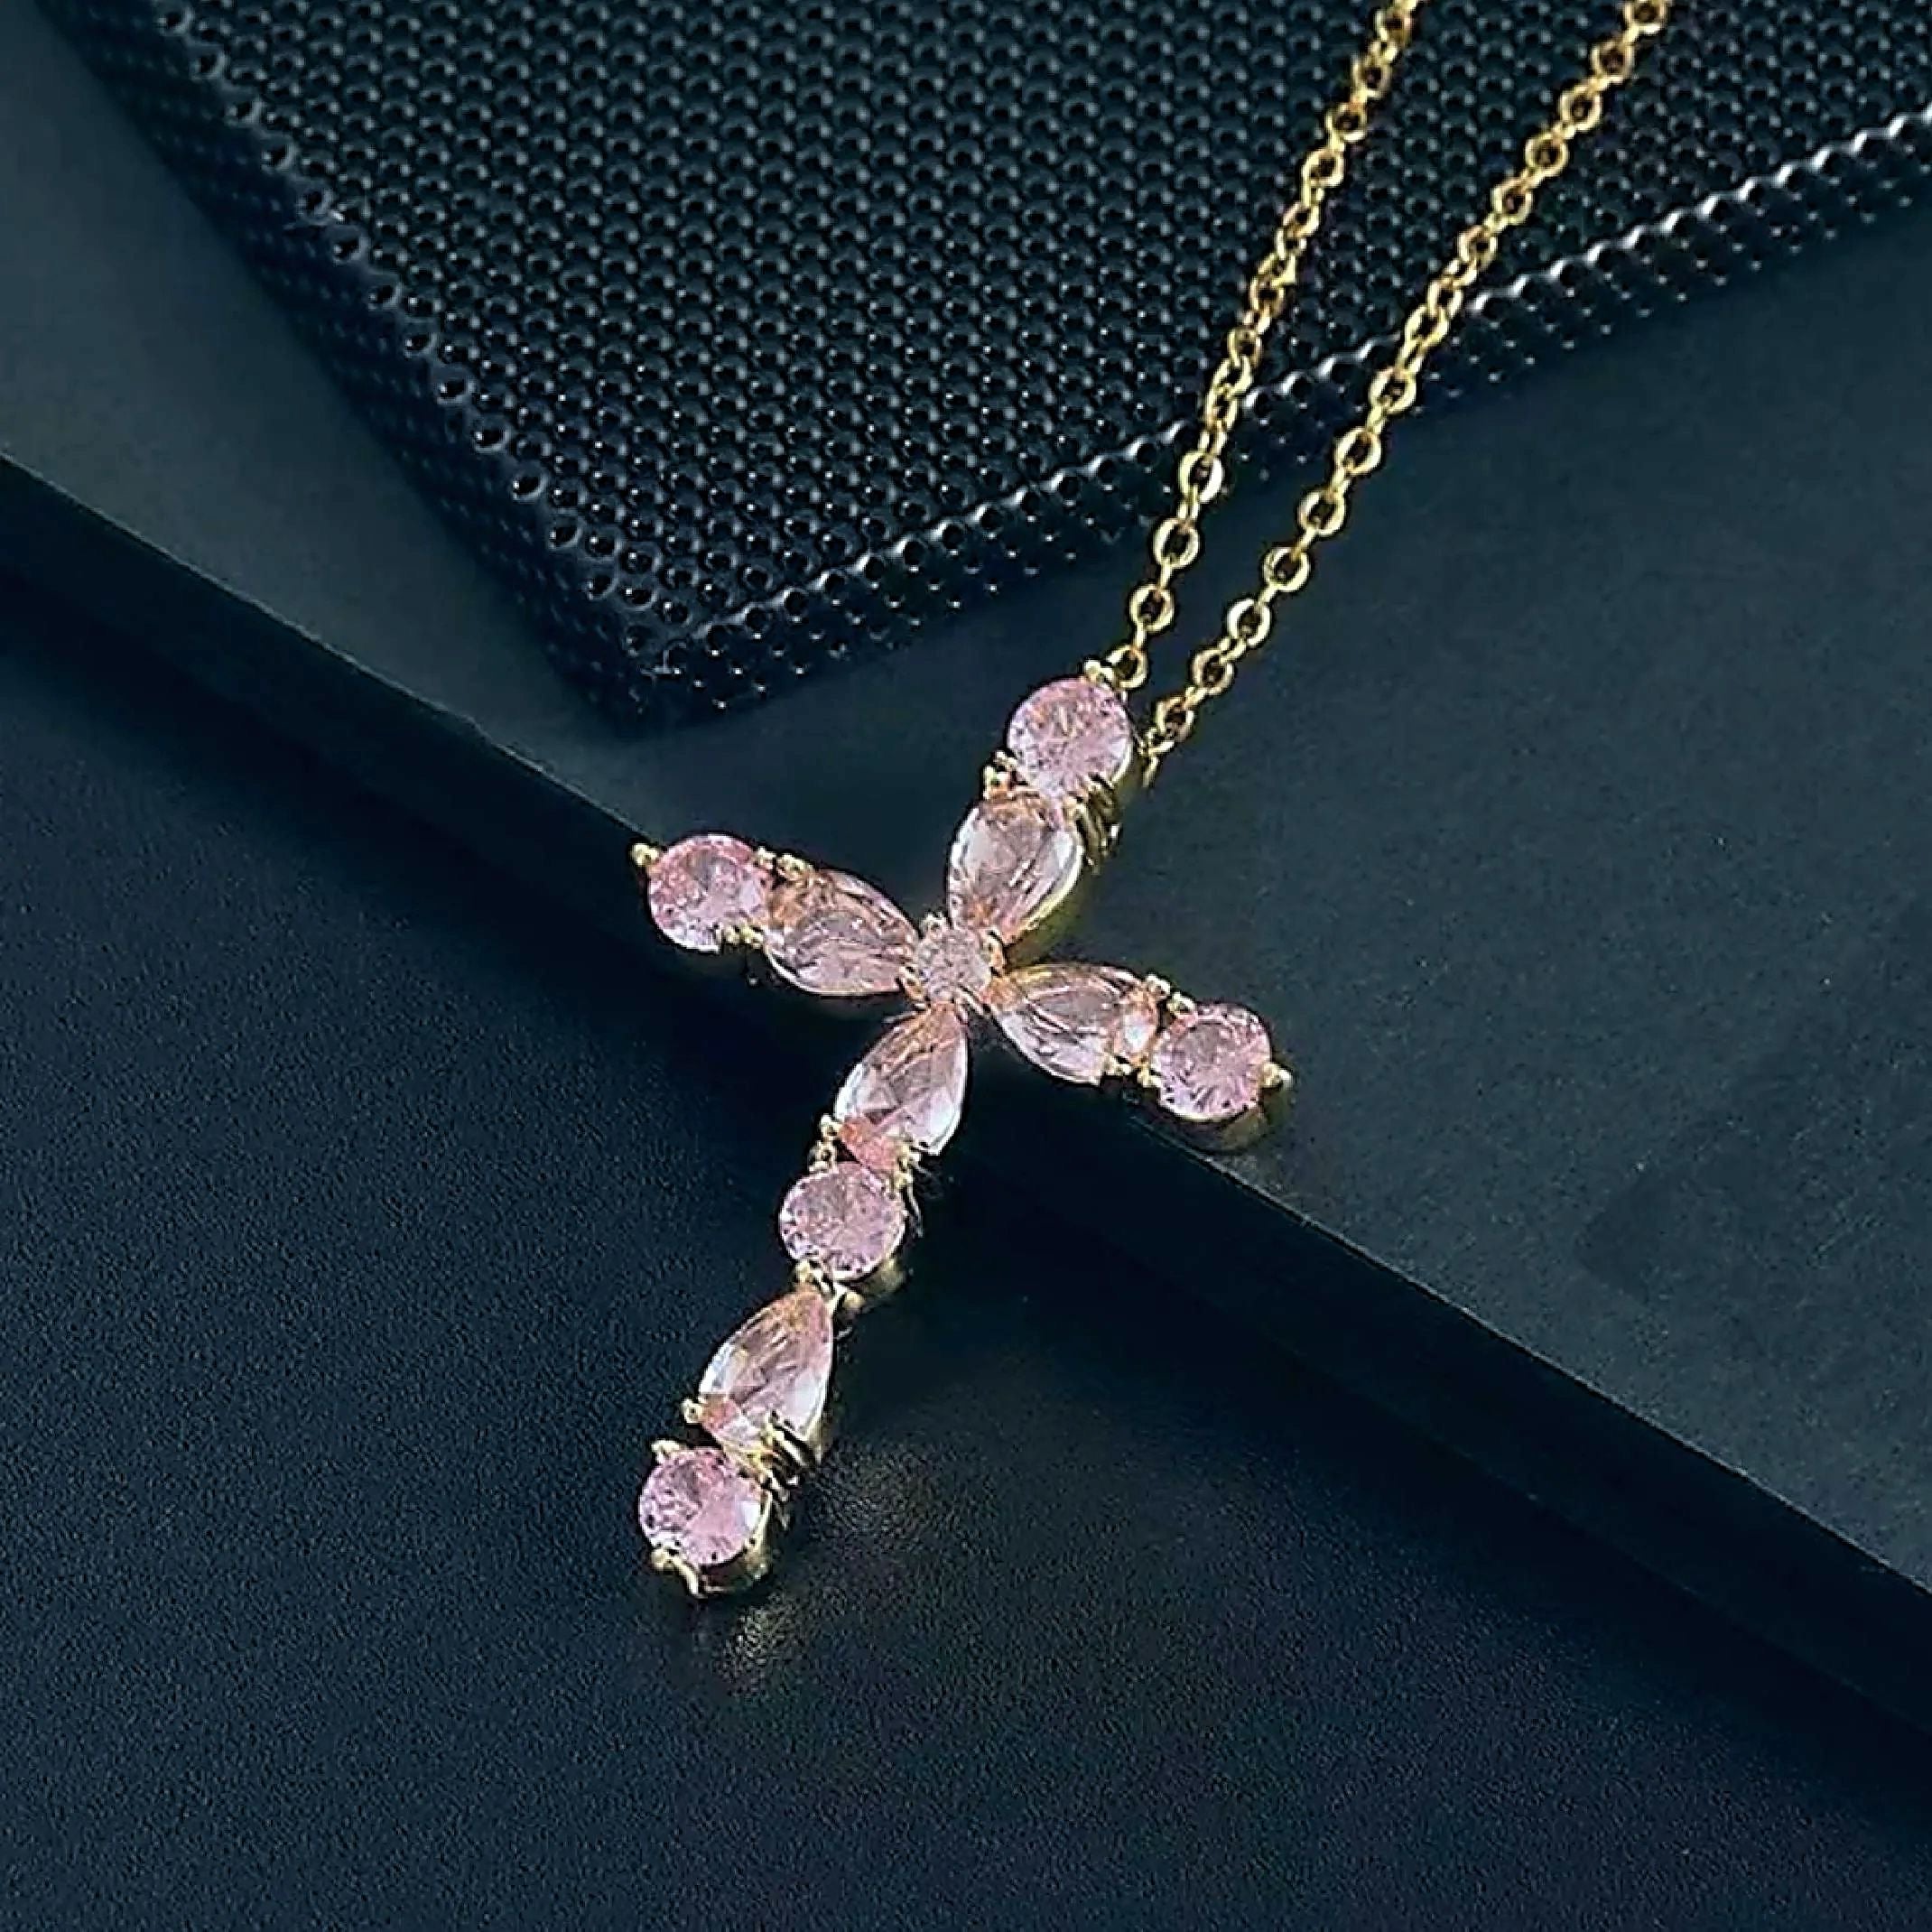 Pink cross necklace 